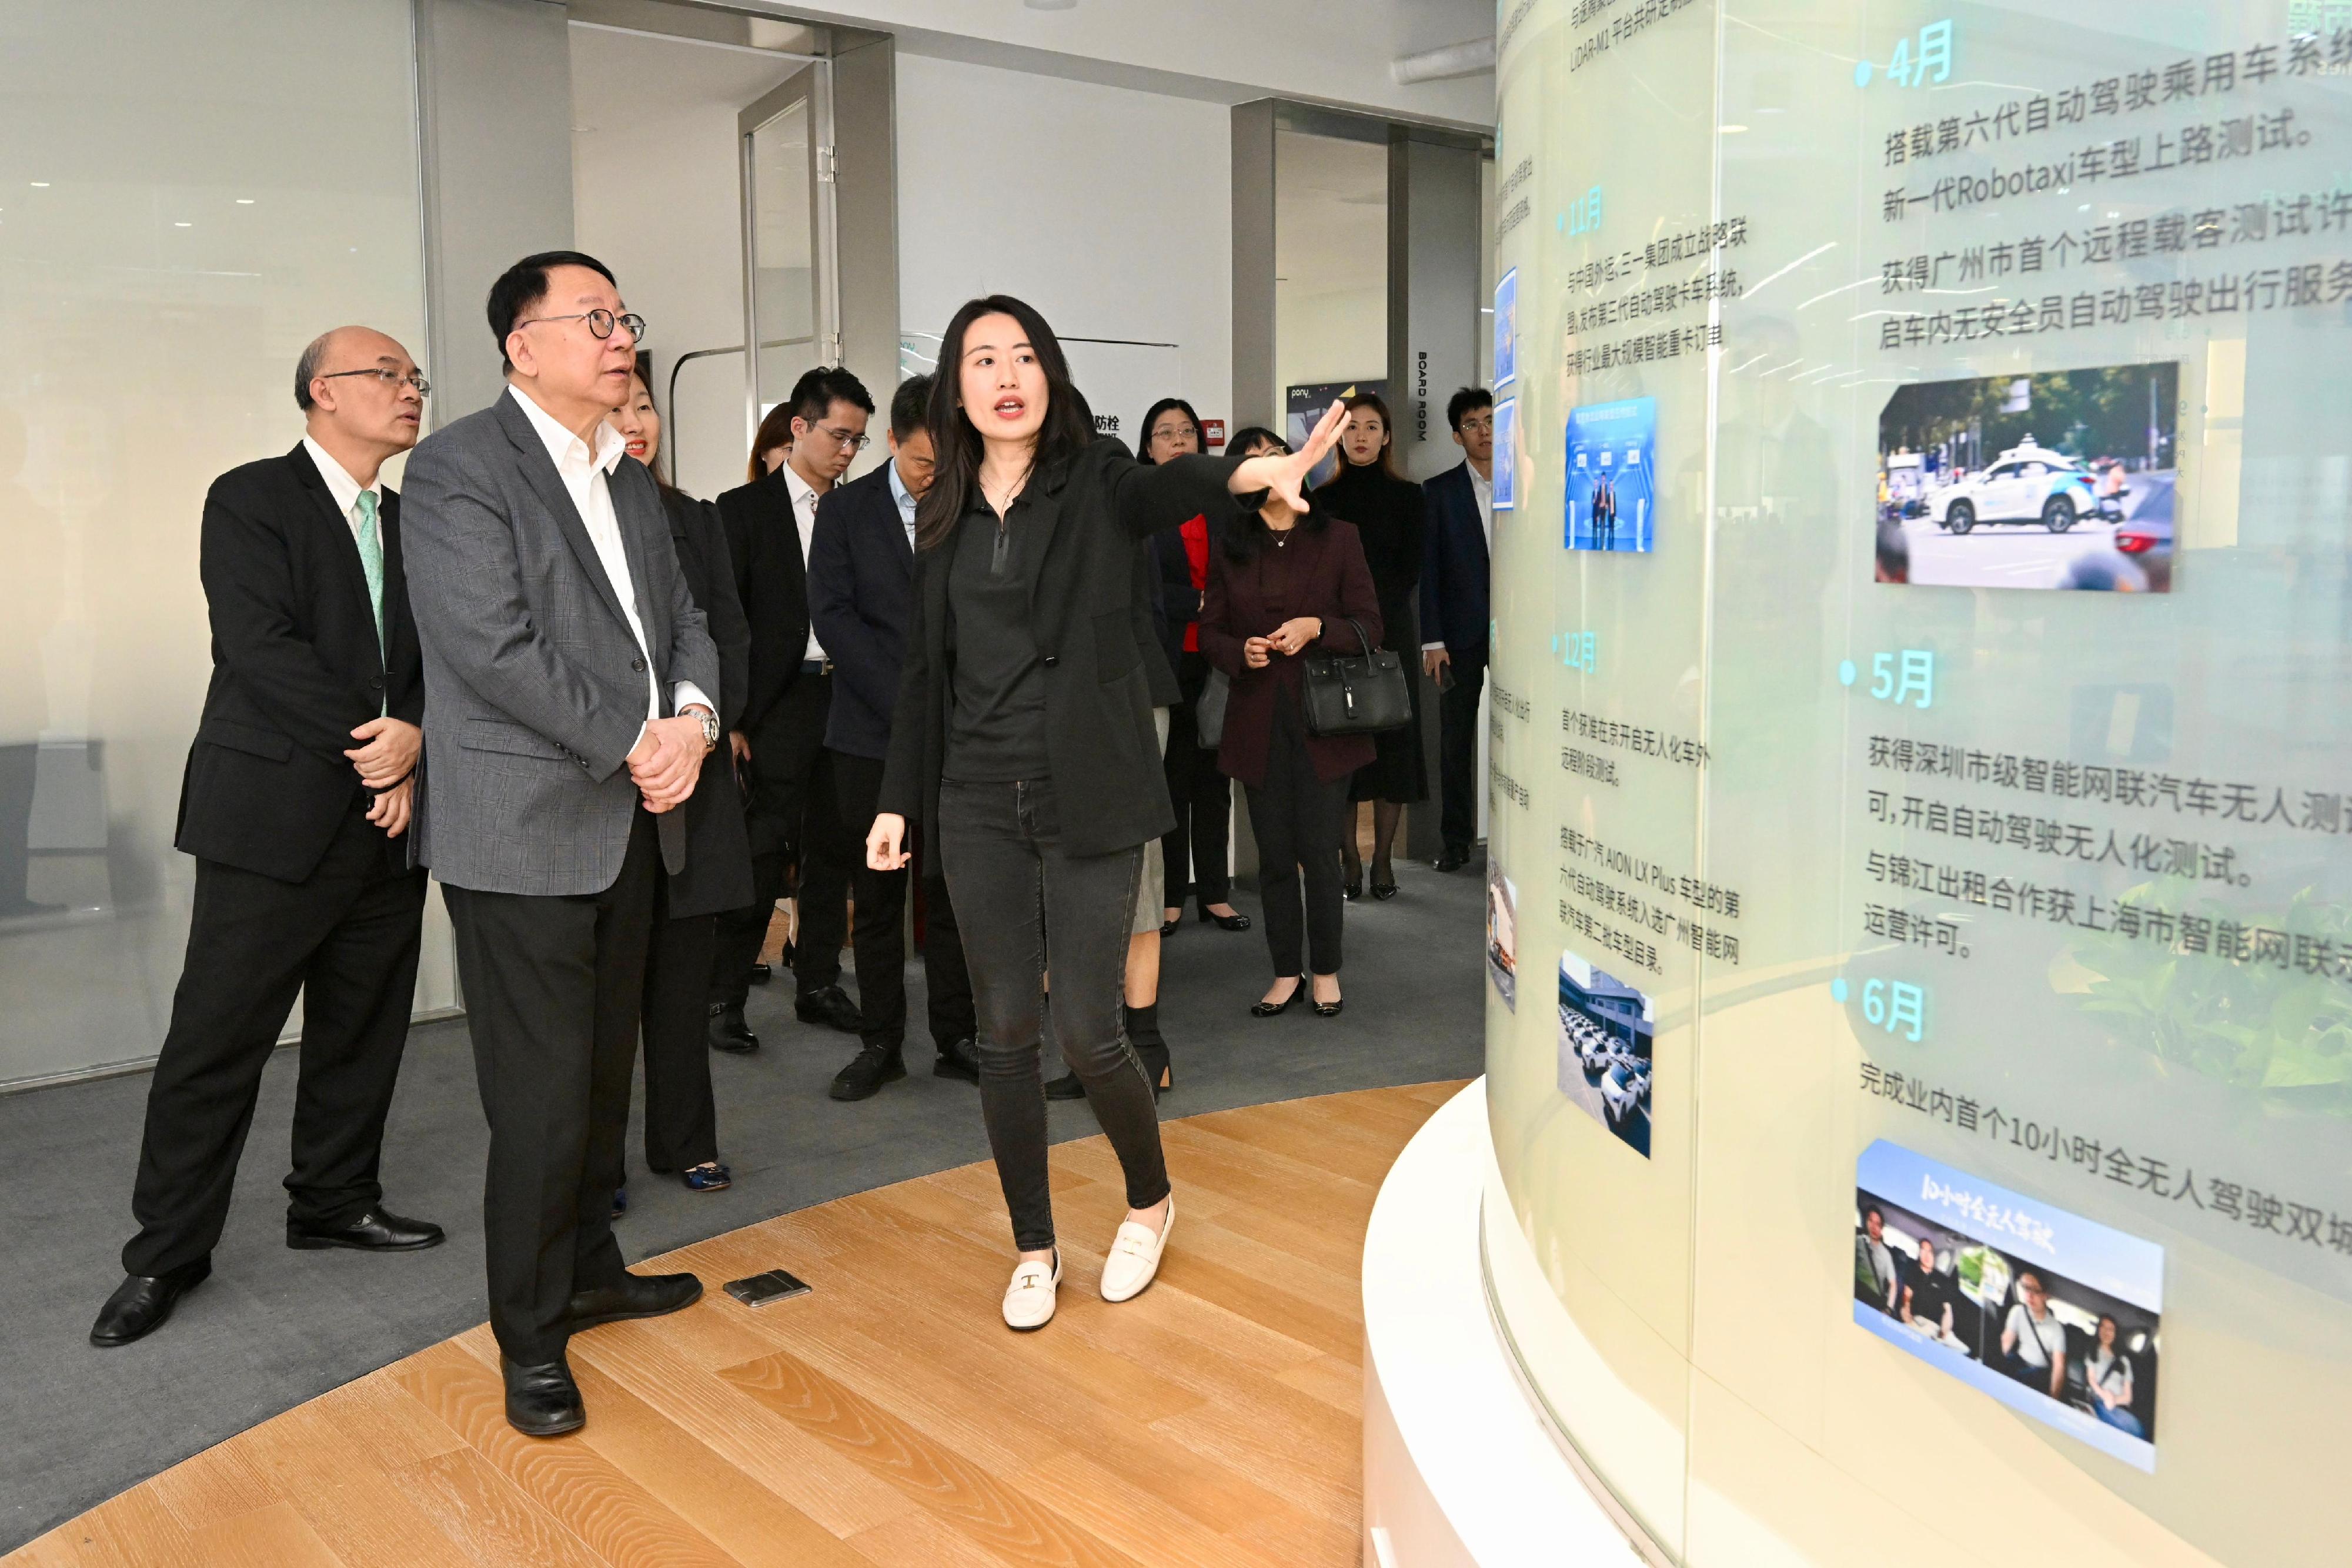 The Chief Secretary for Administration, Mr Chan Kwok-ki, continued his visit to Mainland cities of the Guangdong-Hong Kong-Macao Greater Bay Area in Guangzhou and Huizhou today (January 9). Photo shows Mr Chan (front row, left) touring the autonomous vehicle start-up Pony.ai and receiving a briefing from company Vice President Ms Mo Luyi (front row, right) in Nansha, Guangzhou.